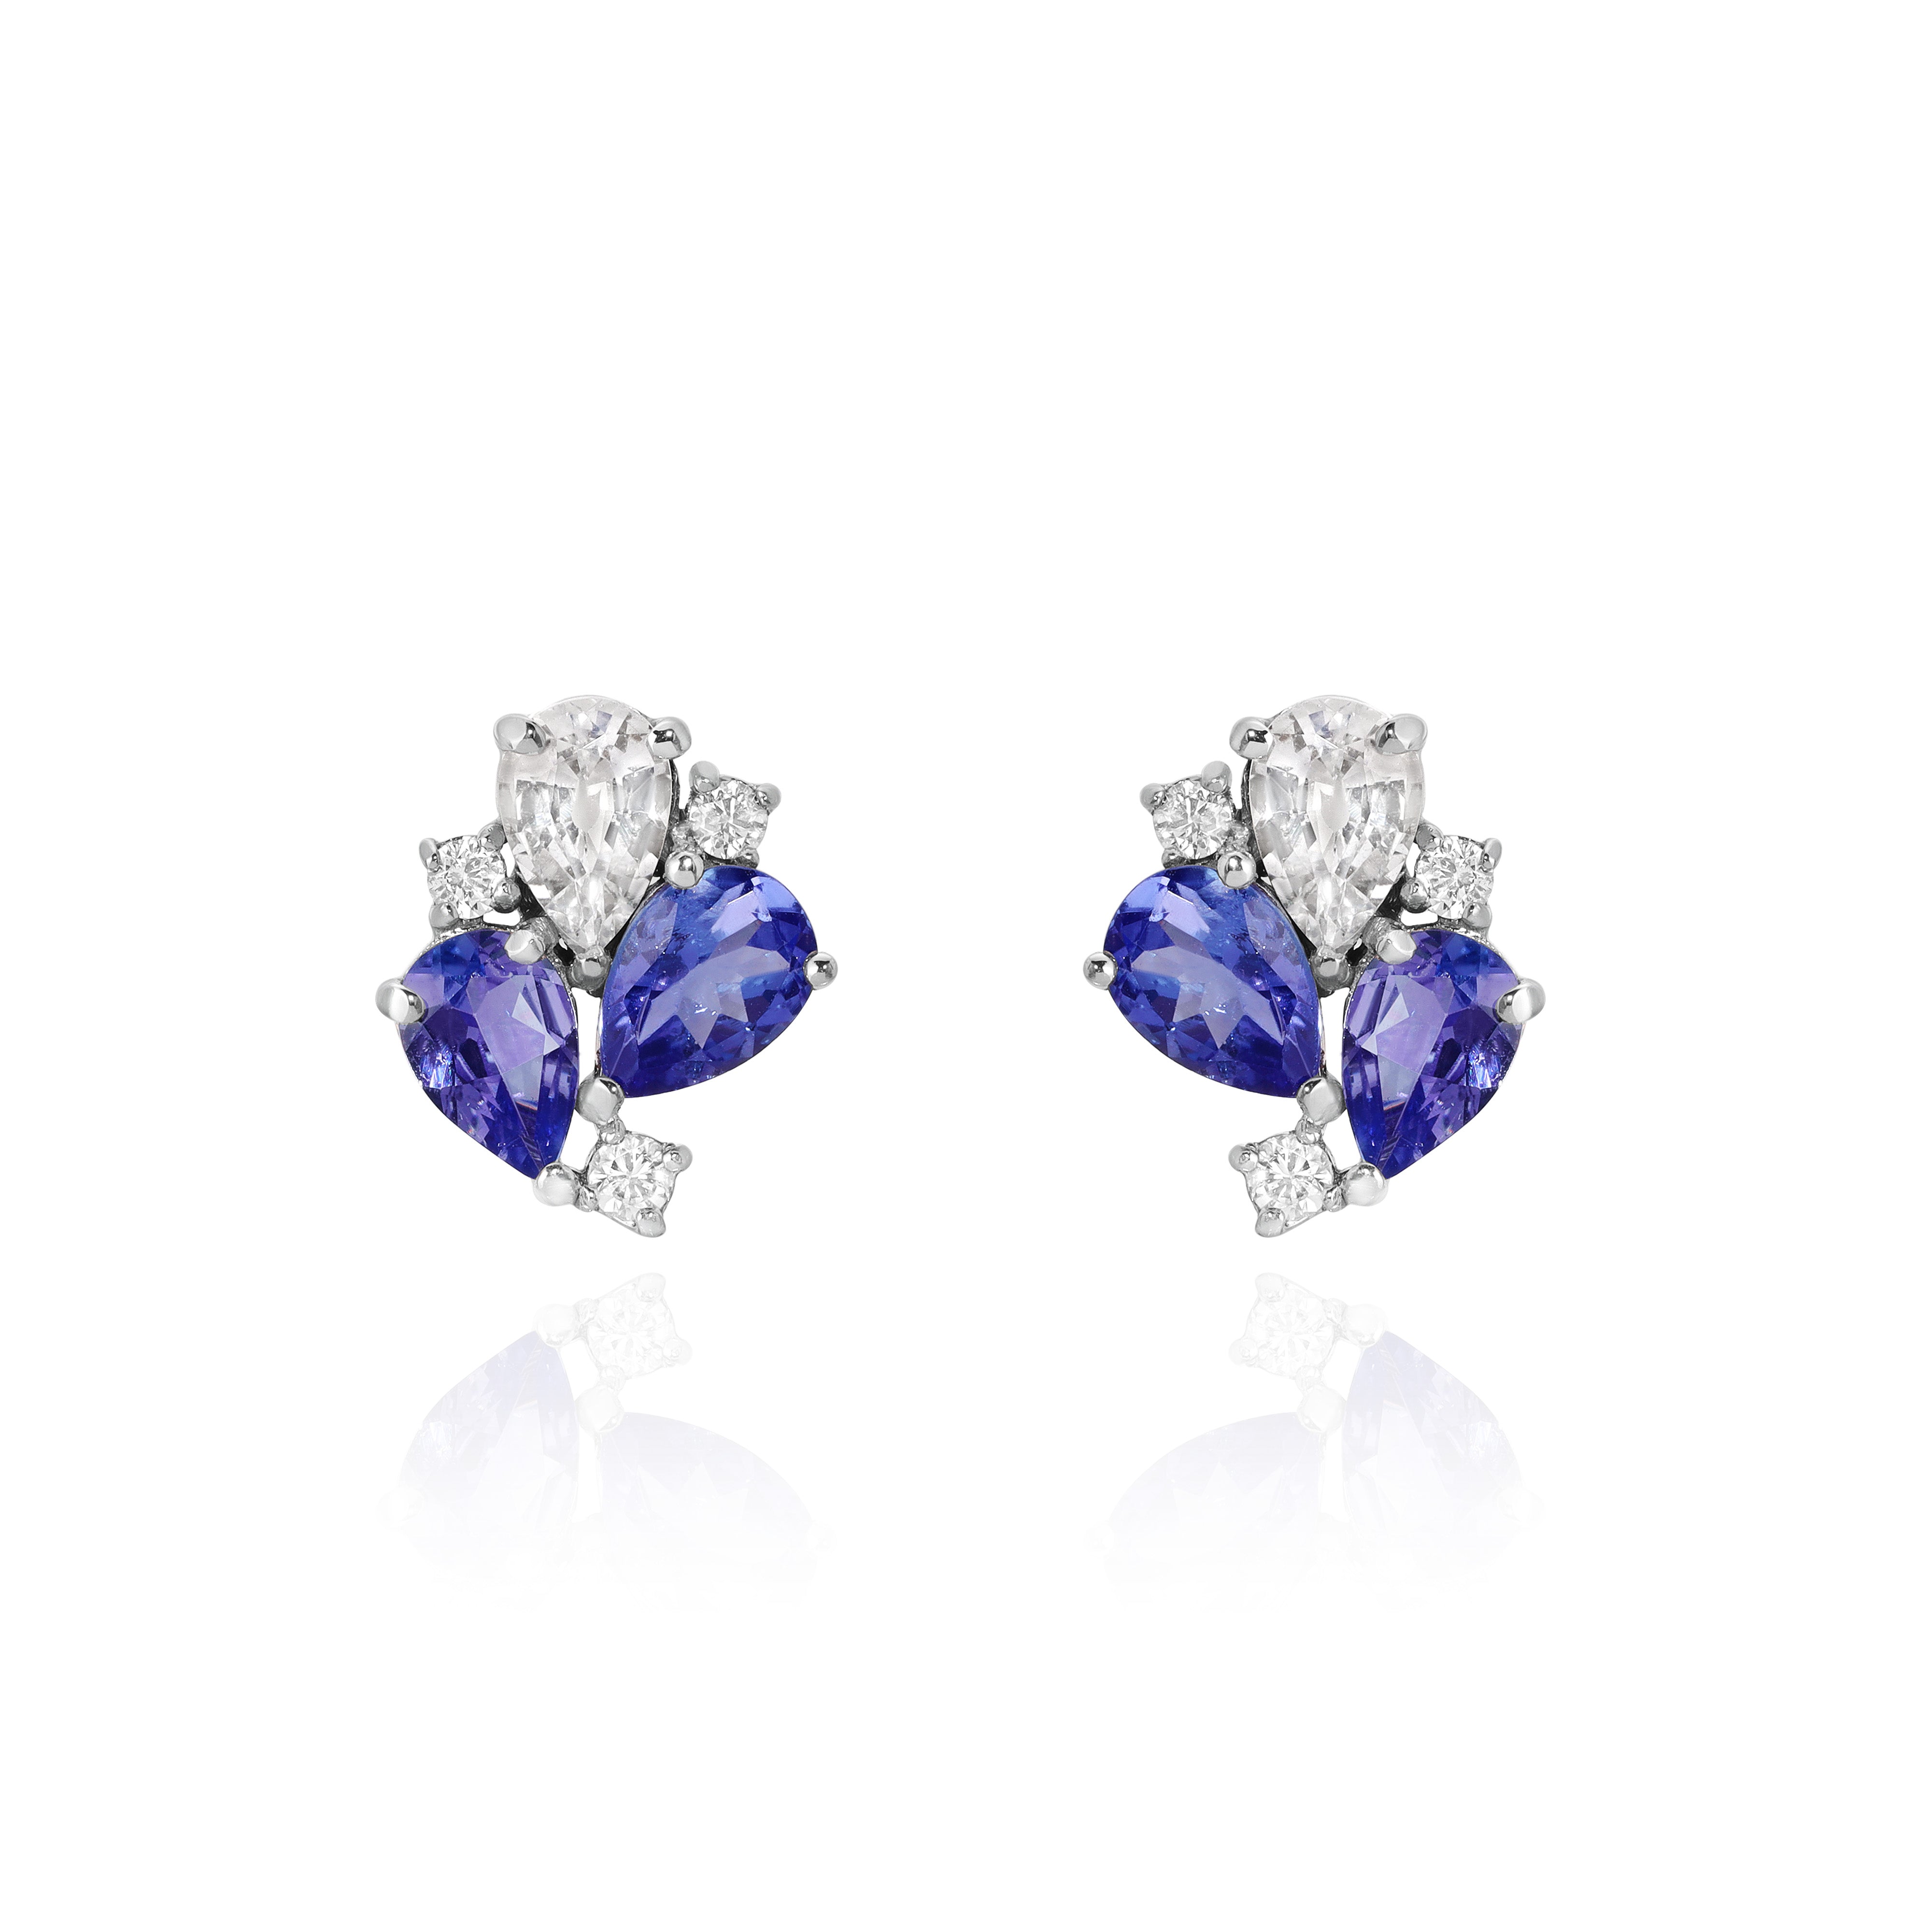 White Gold Earrings with pear shaped Tanzanite and Morganite, and small round Diamonds, Small